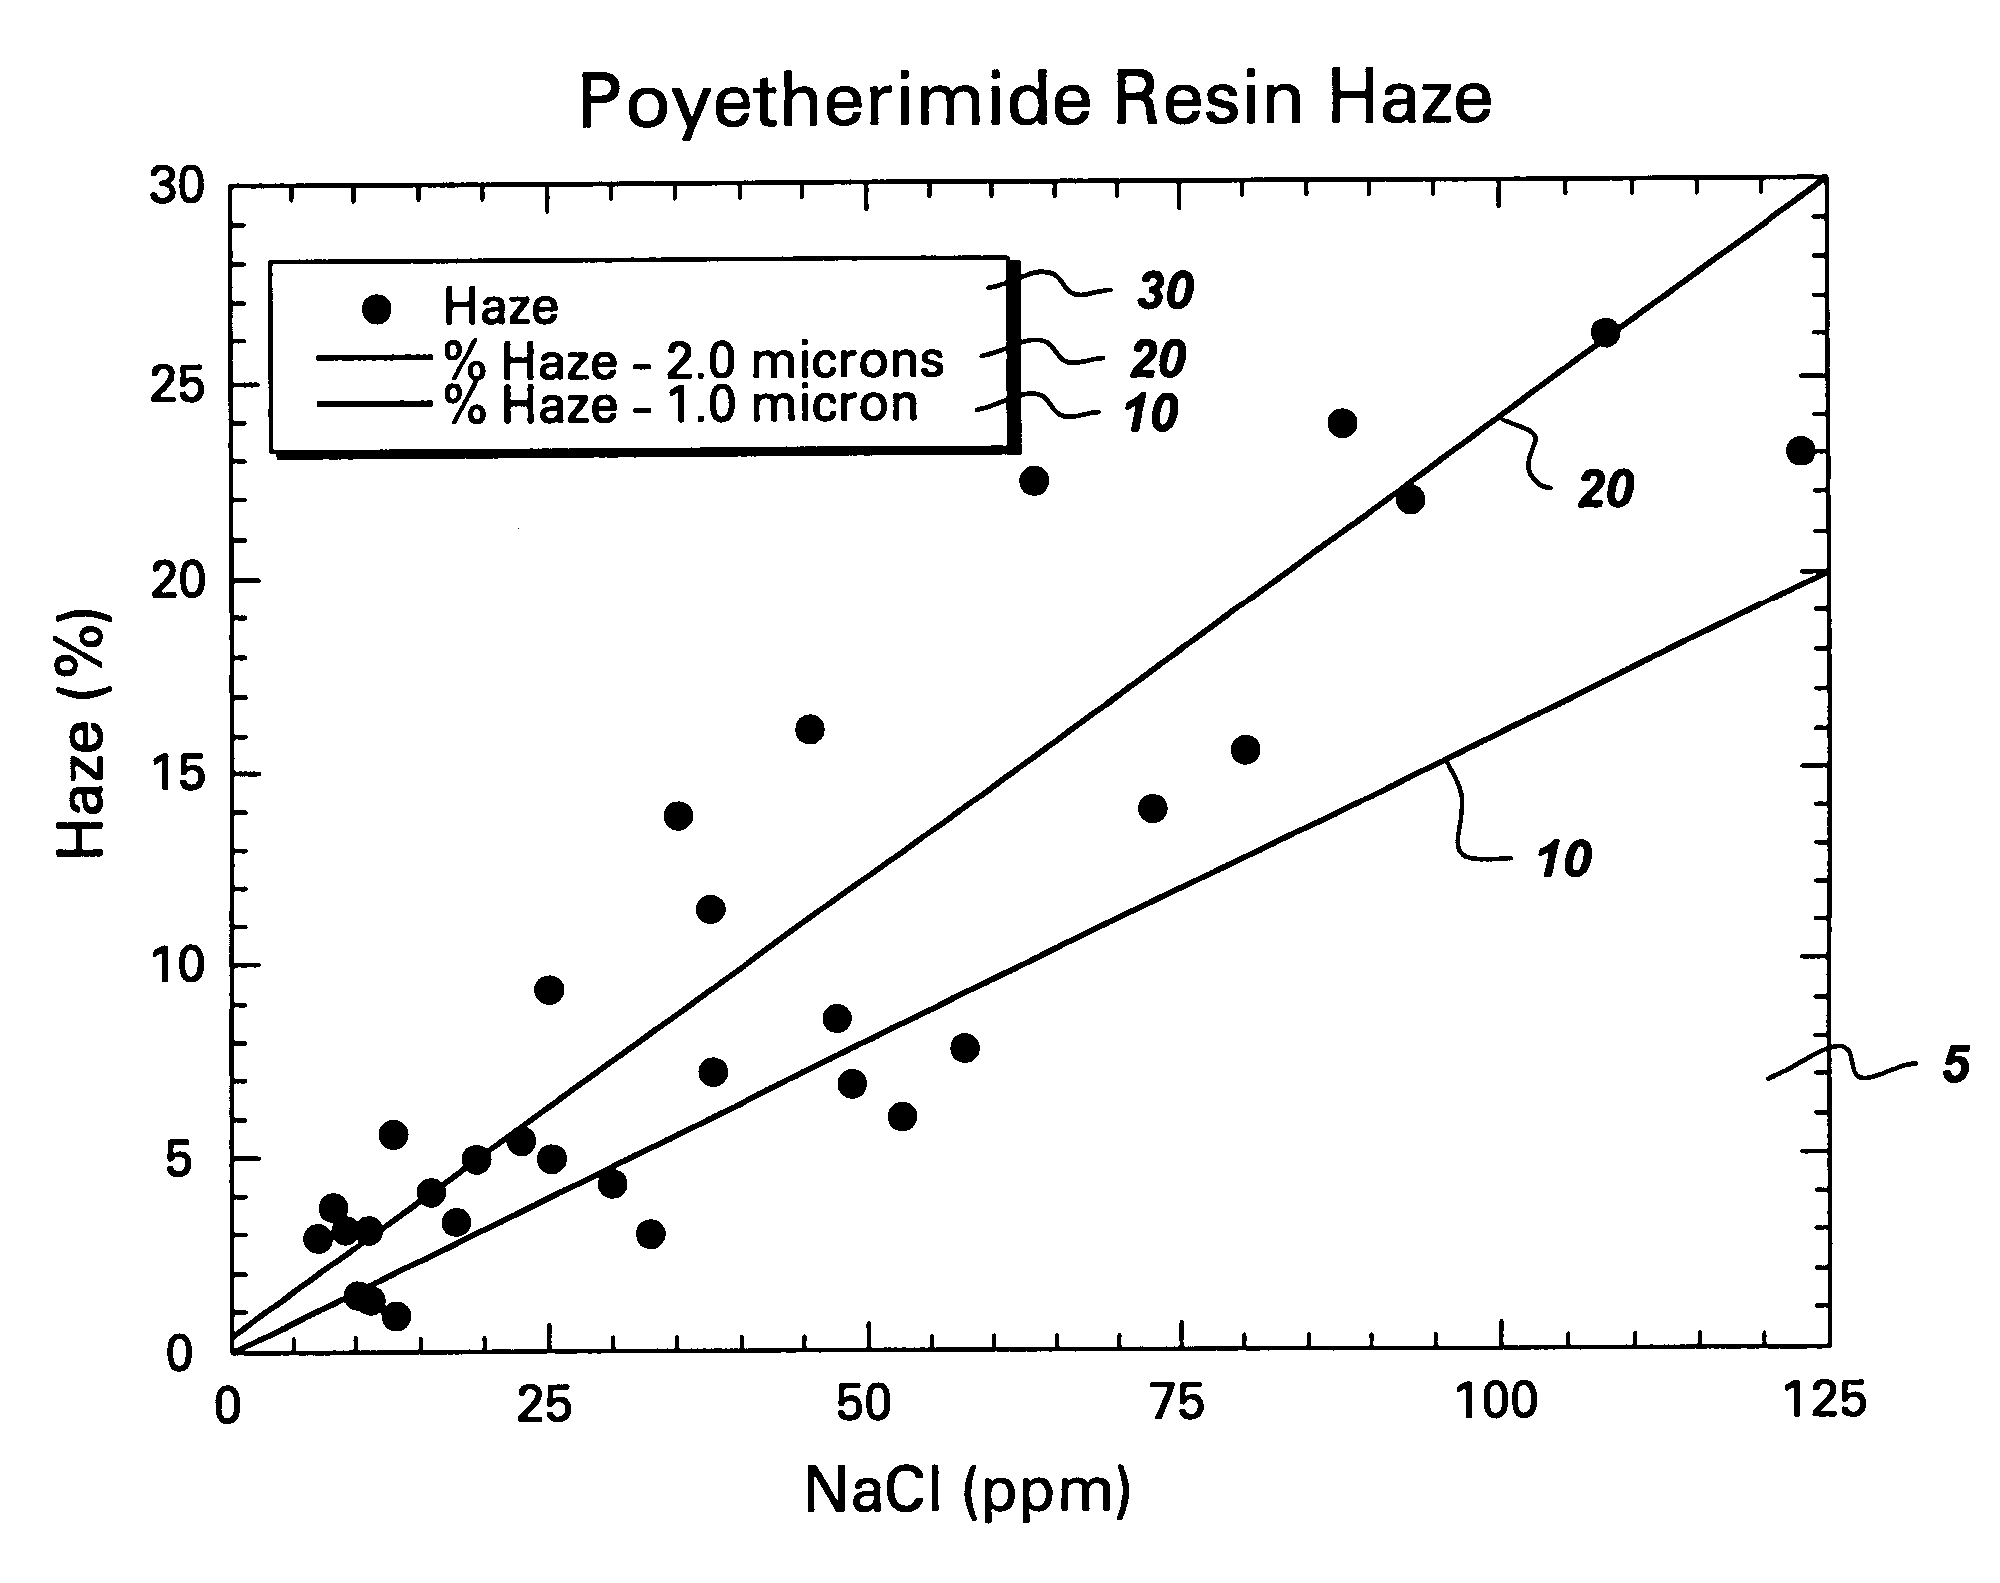 Method for controlling haze in an article comprising a polymer composition